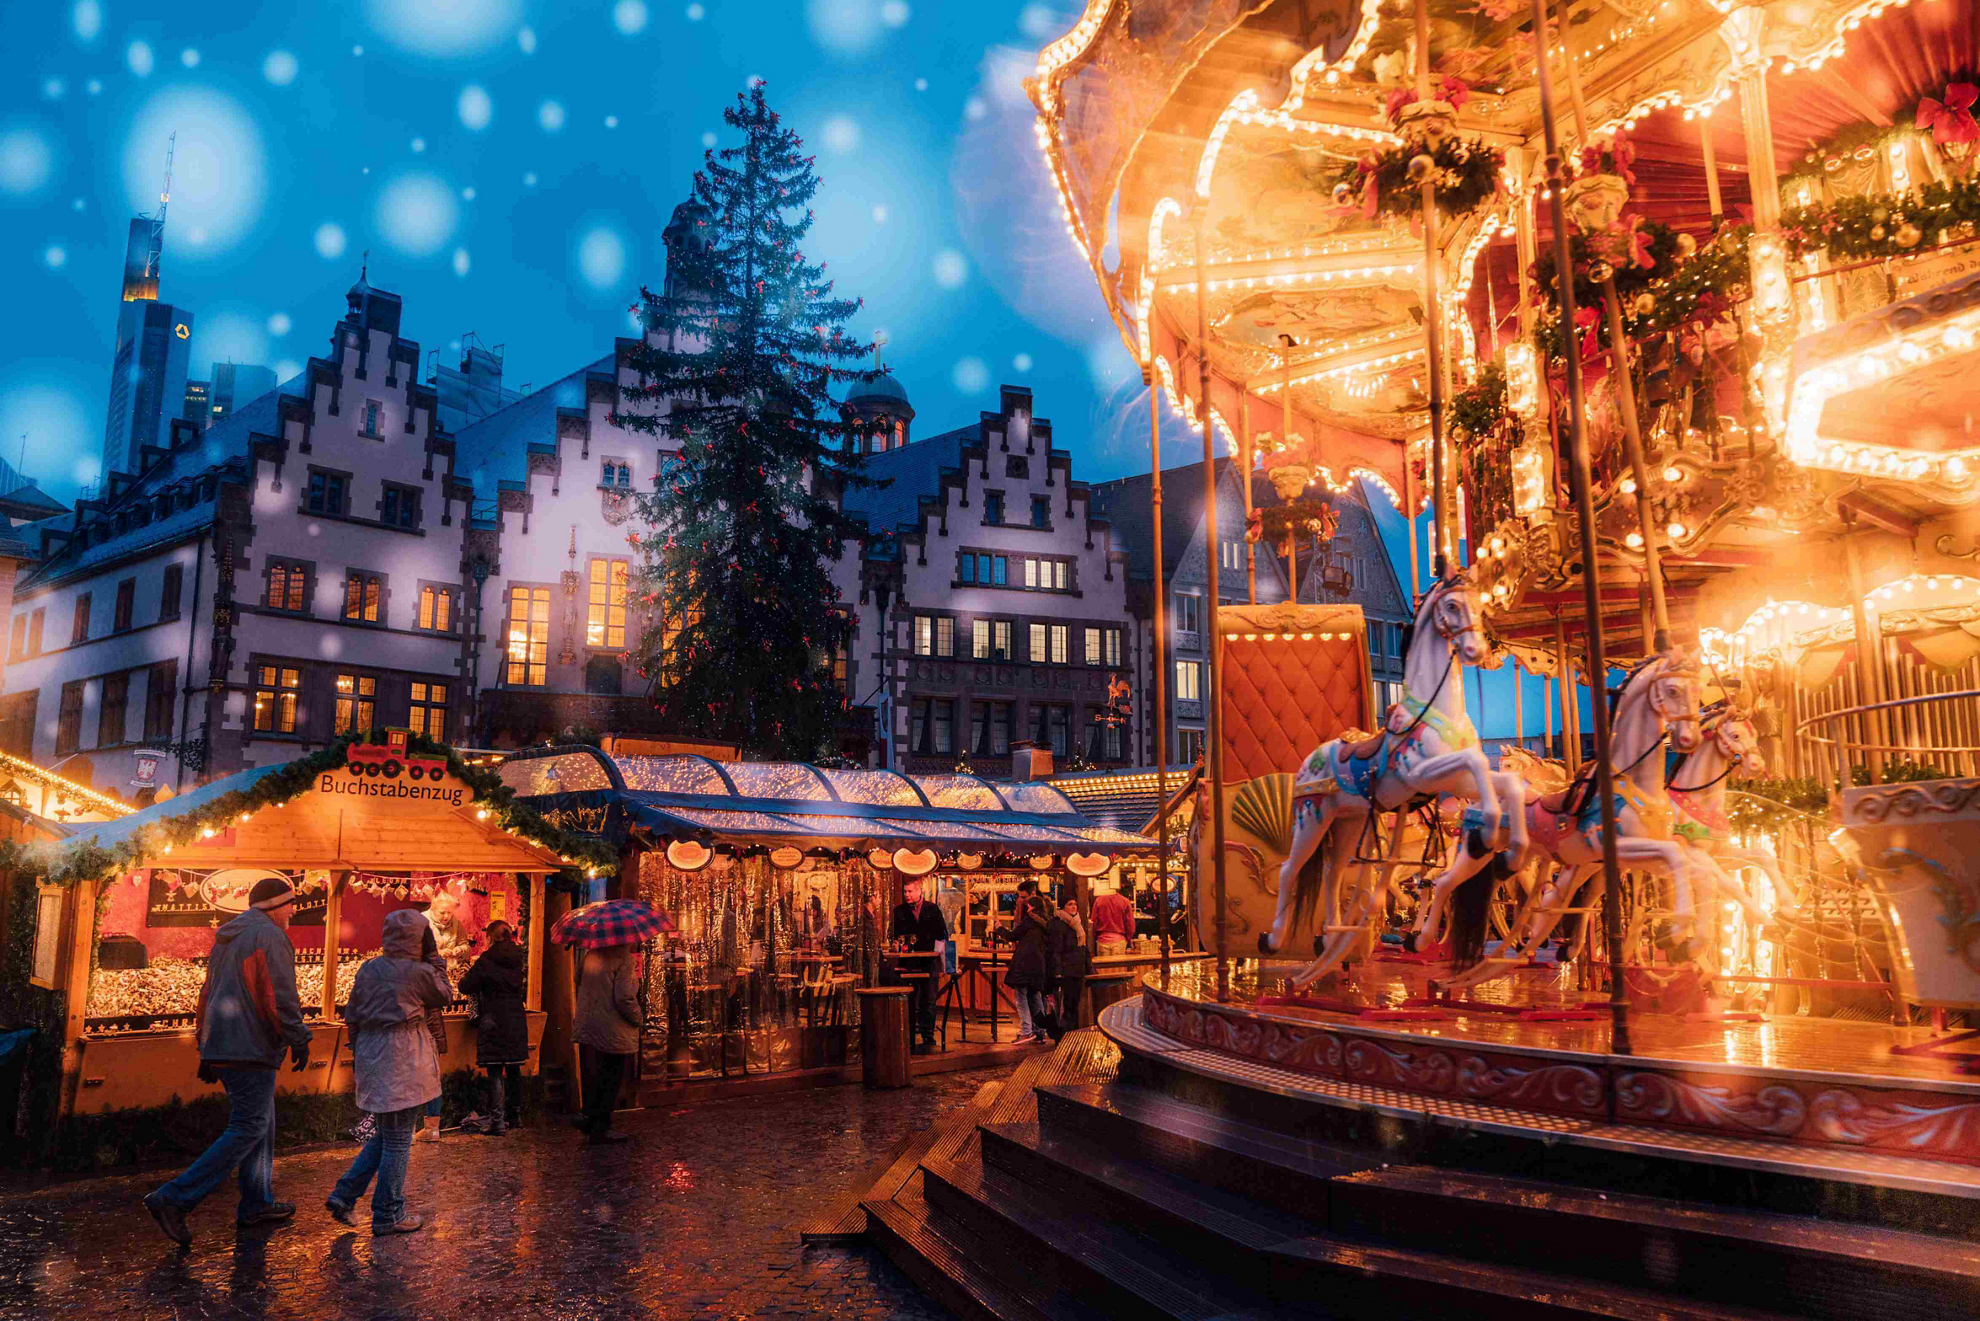 Discover the magic of the festive season and visit the best Christmas markets in Europe